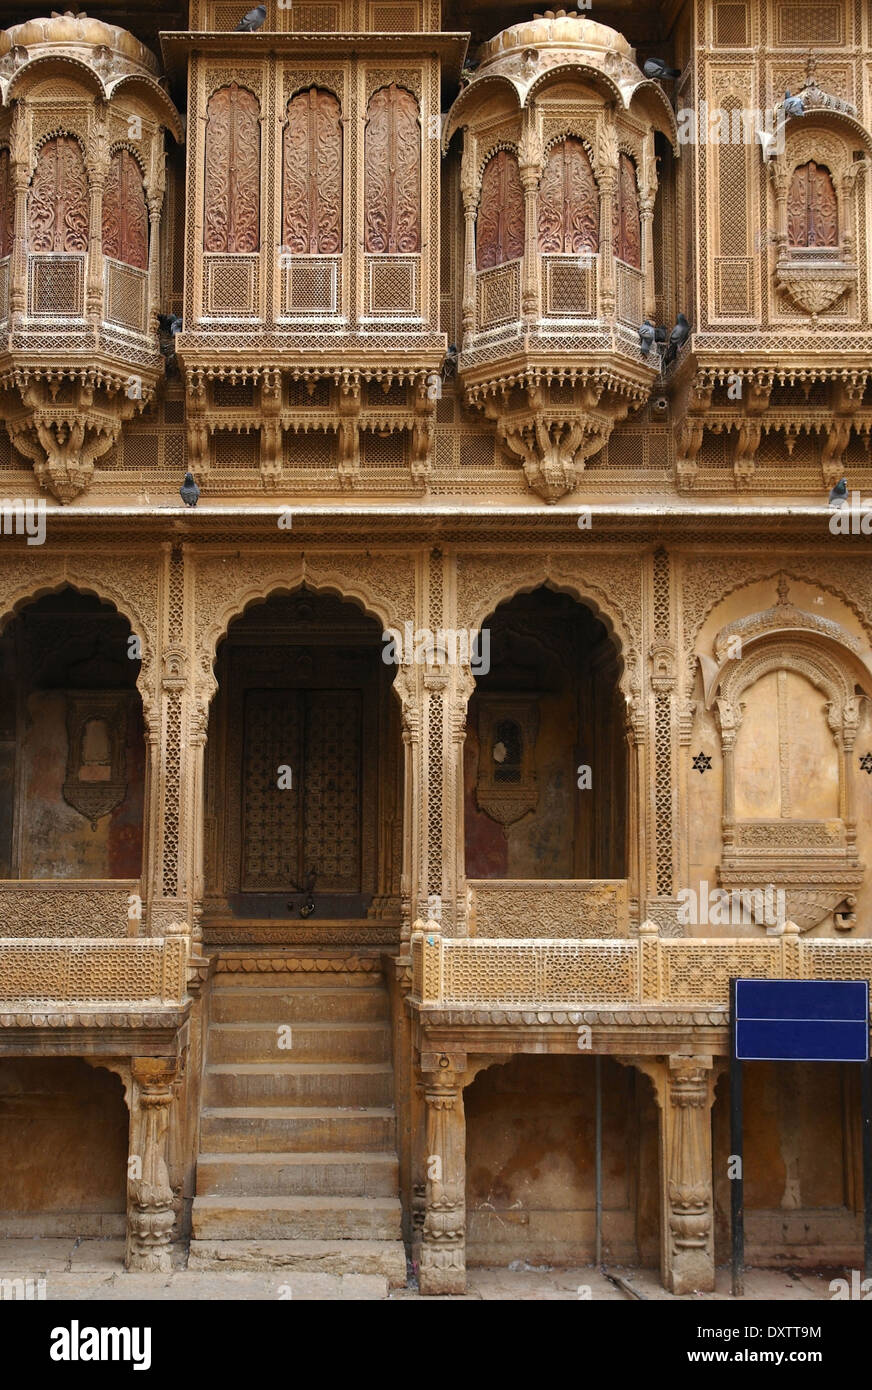 city view of Jaisalmer, a town in India Stock Photo